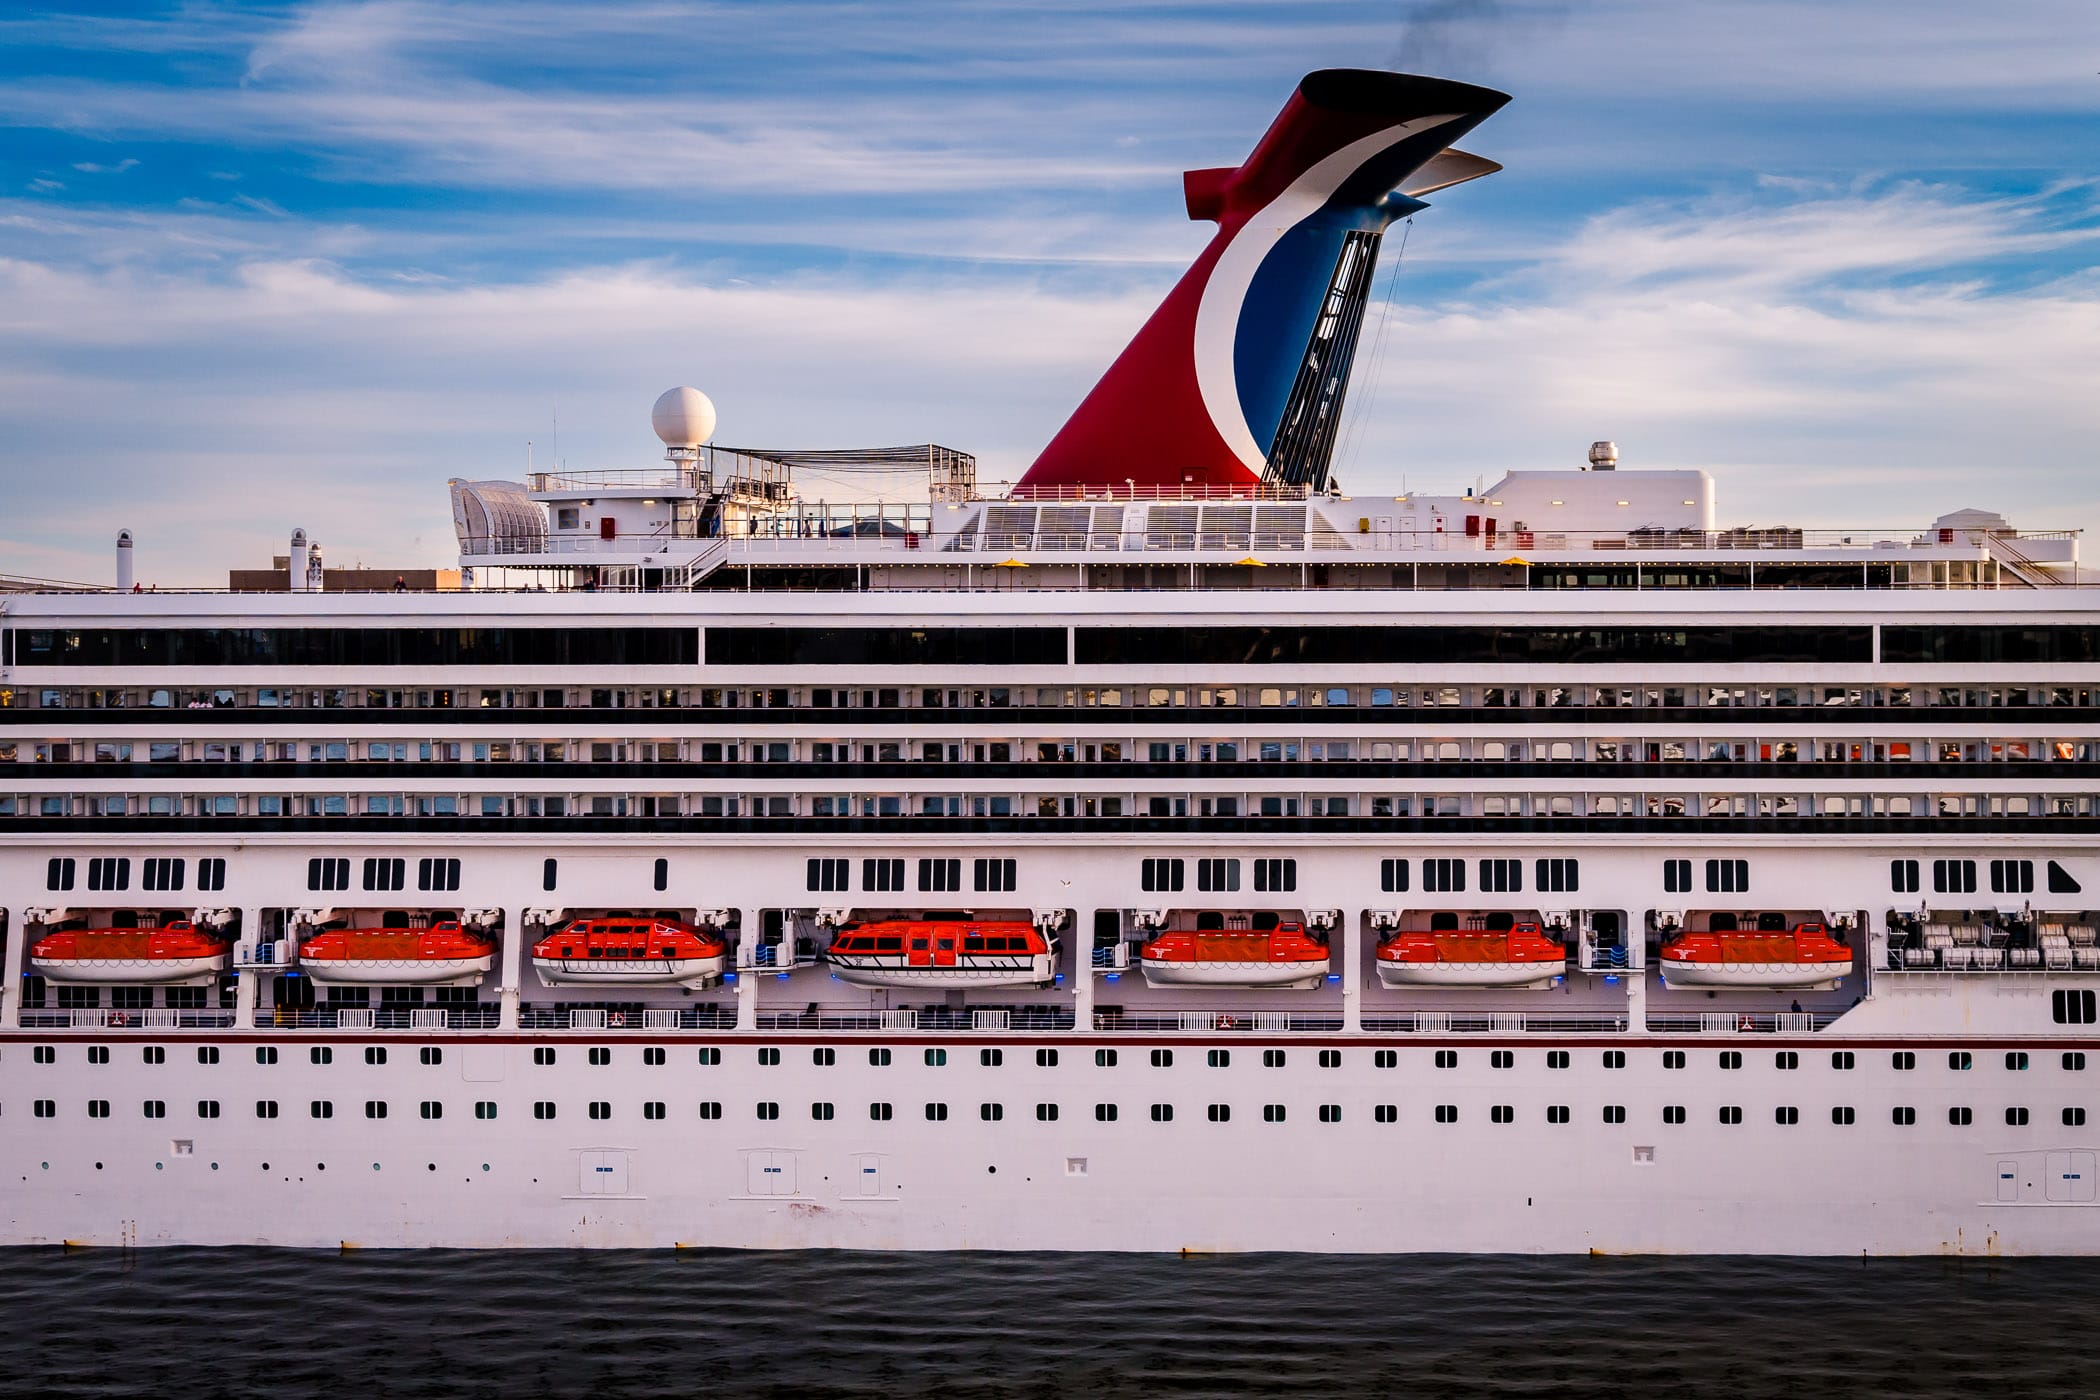 The port side of the cruise ship Carnival Freedom as she prepares to set sail from Galveston, Texas.